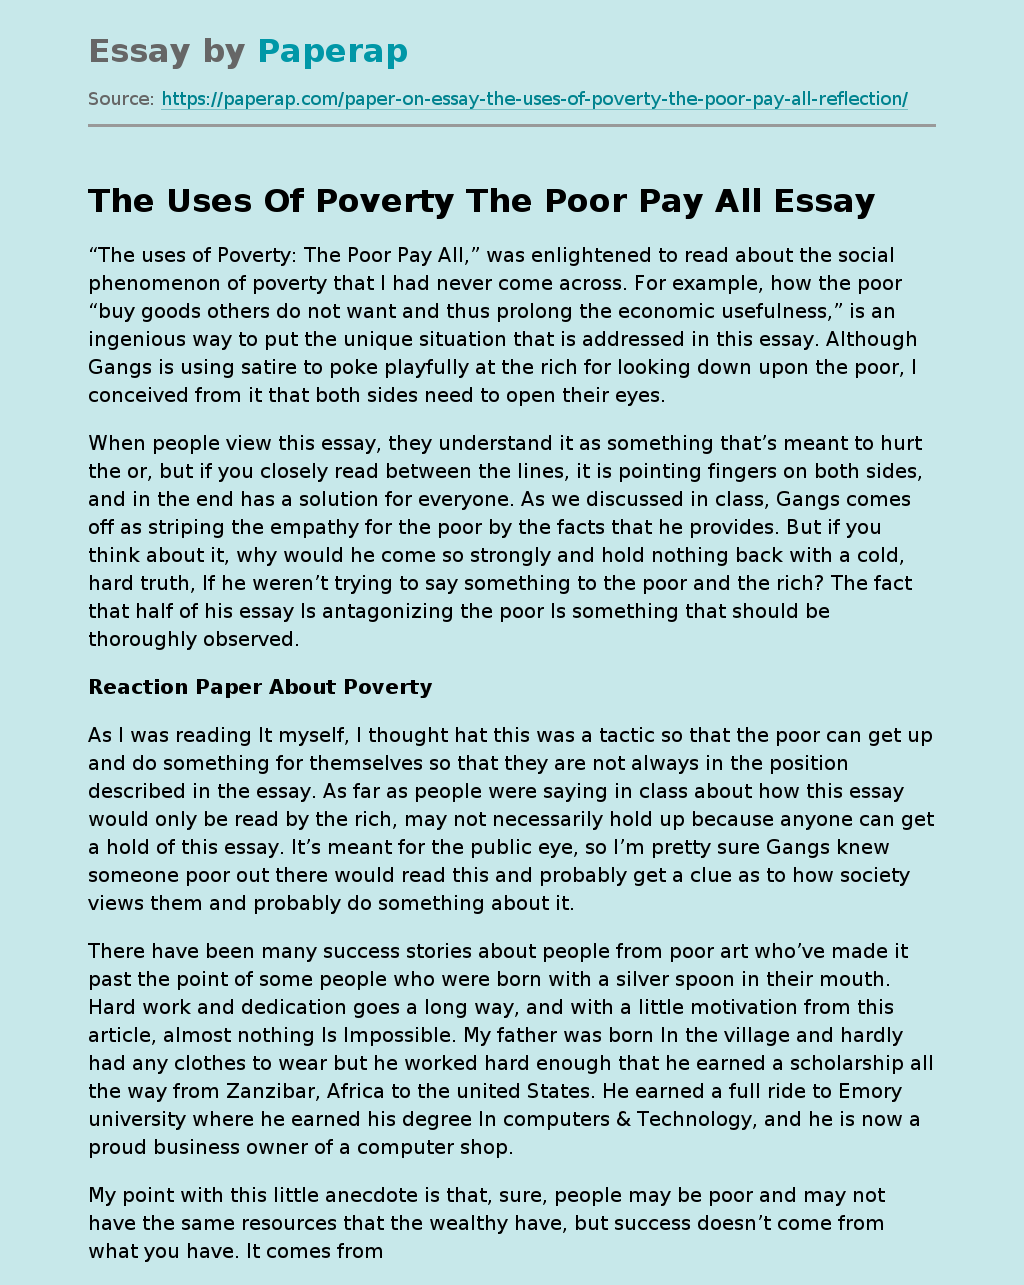 The Uses Of Poverty The Poor Pay All